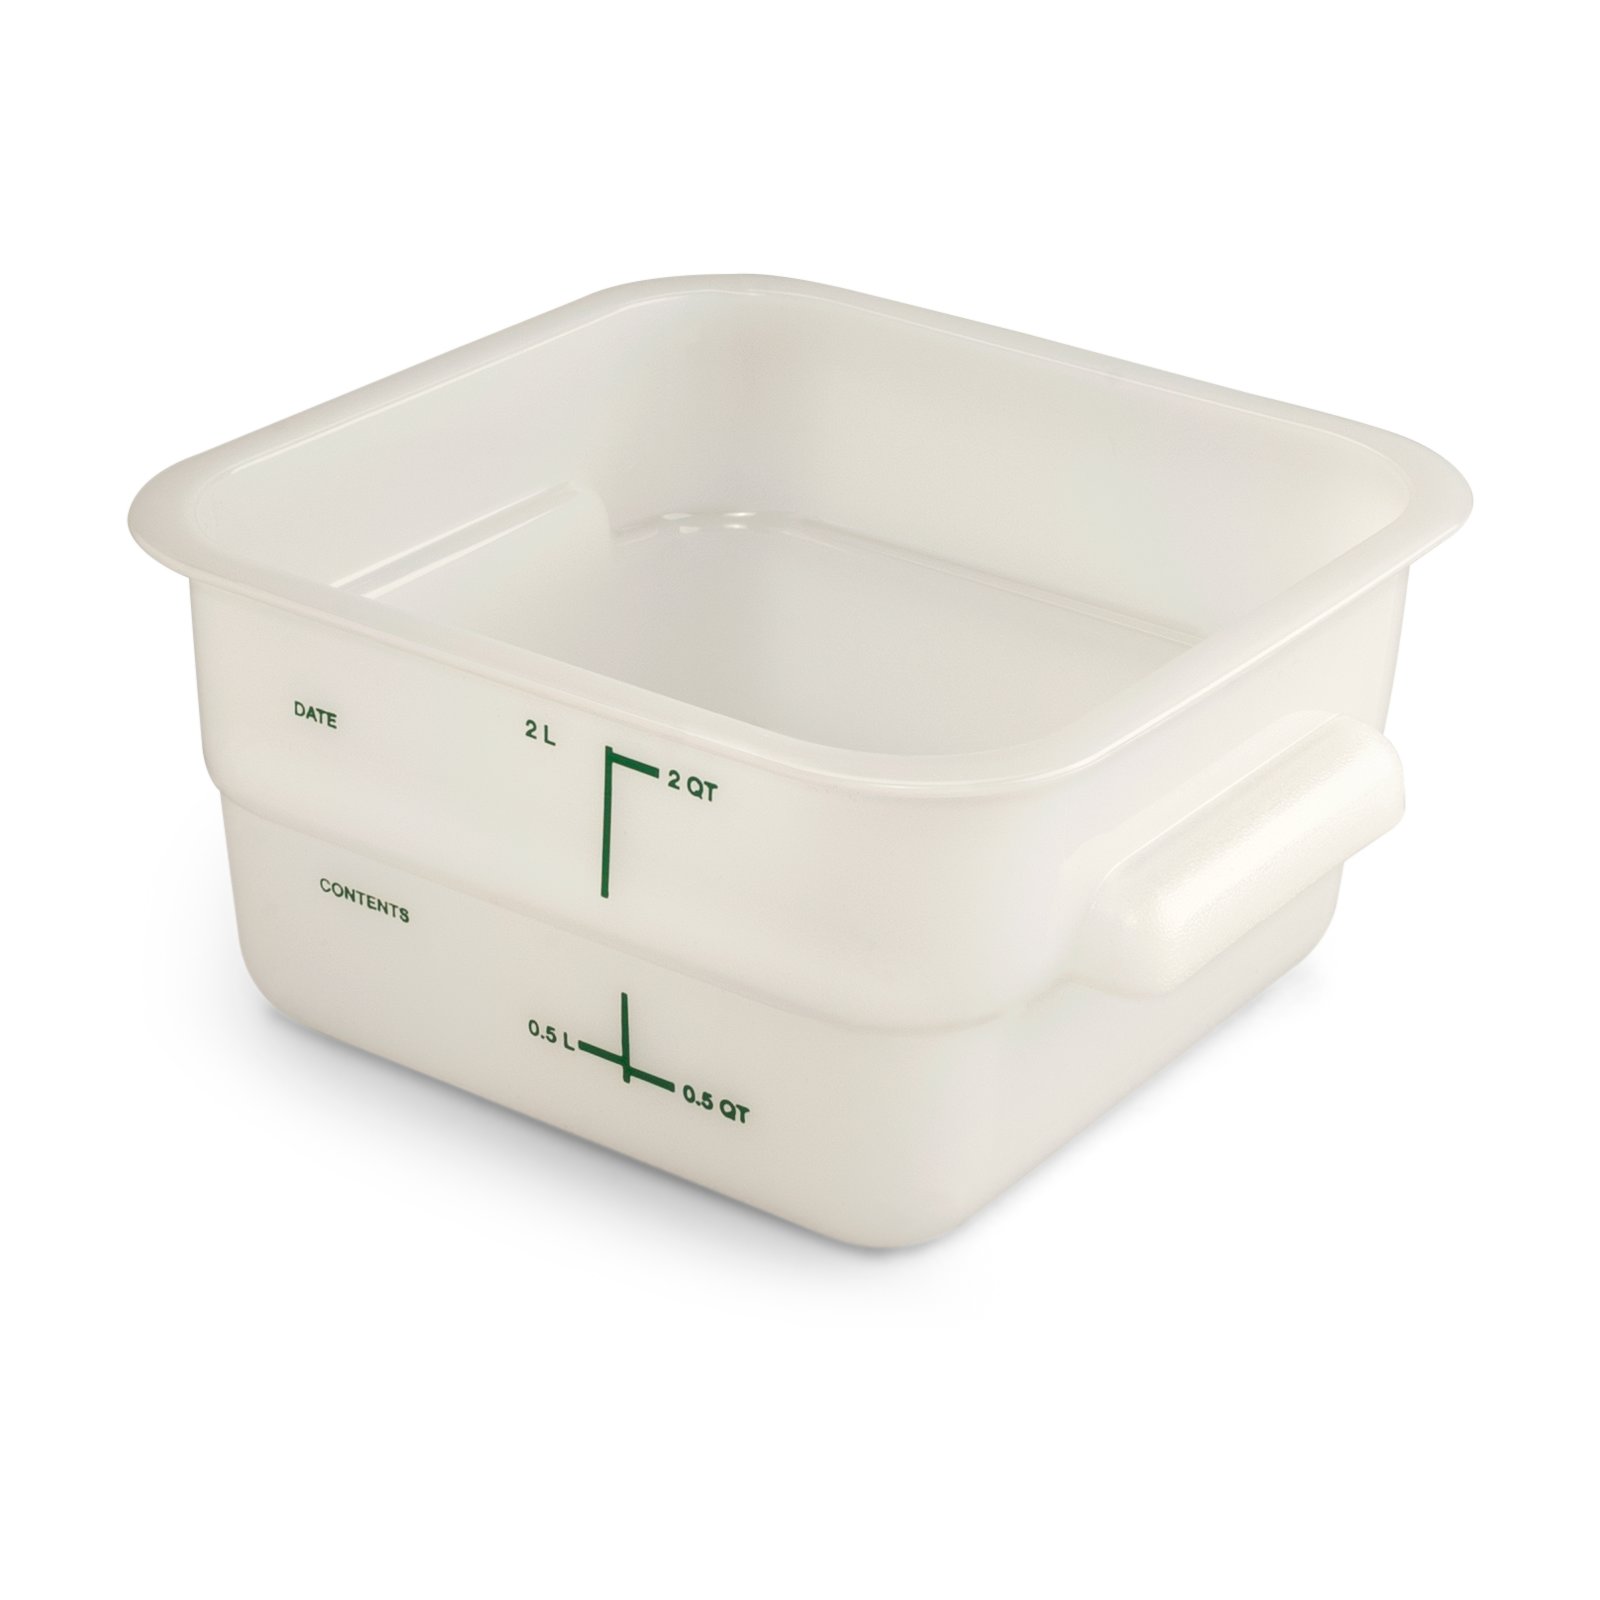 Cambro Set of 3 Square Food Storage Containers with Lids, 2 Quart